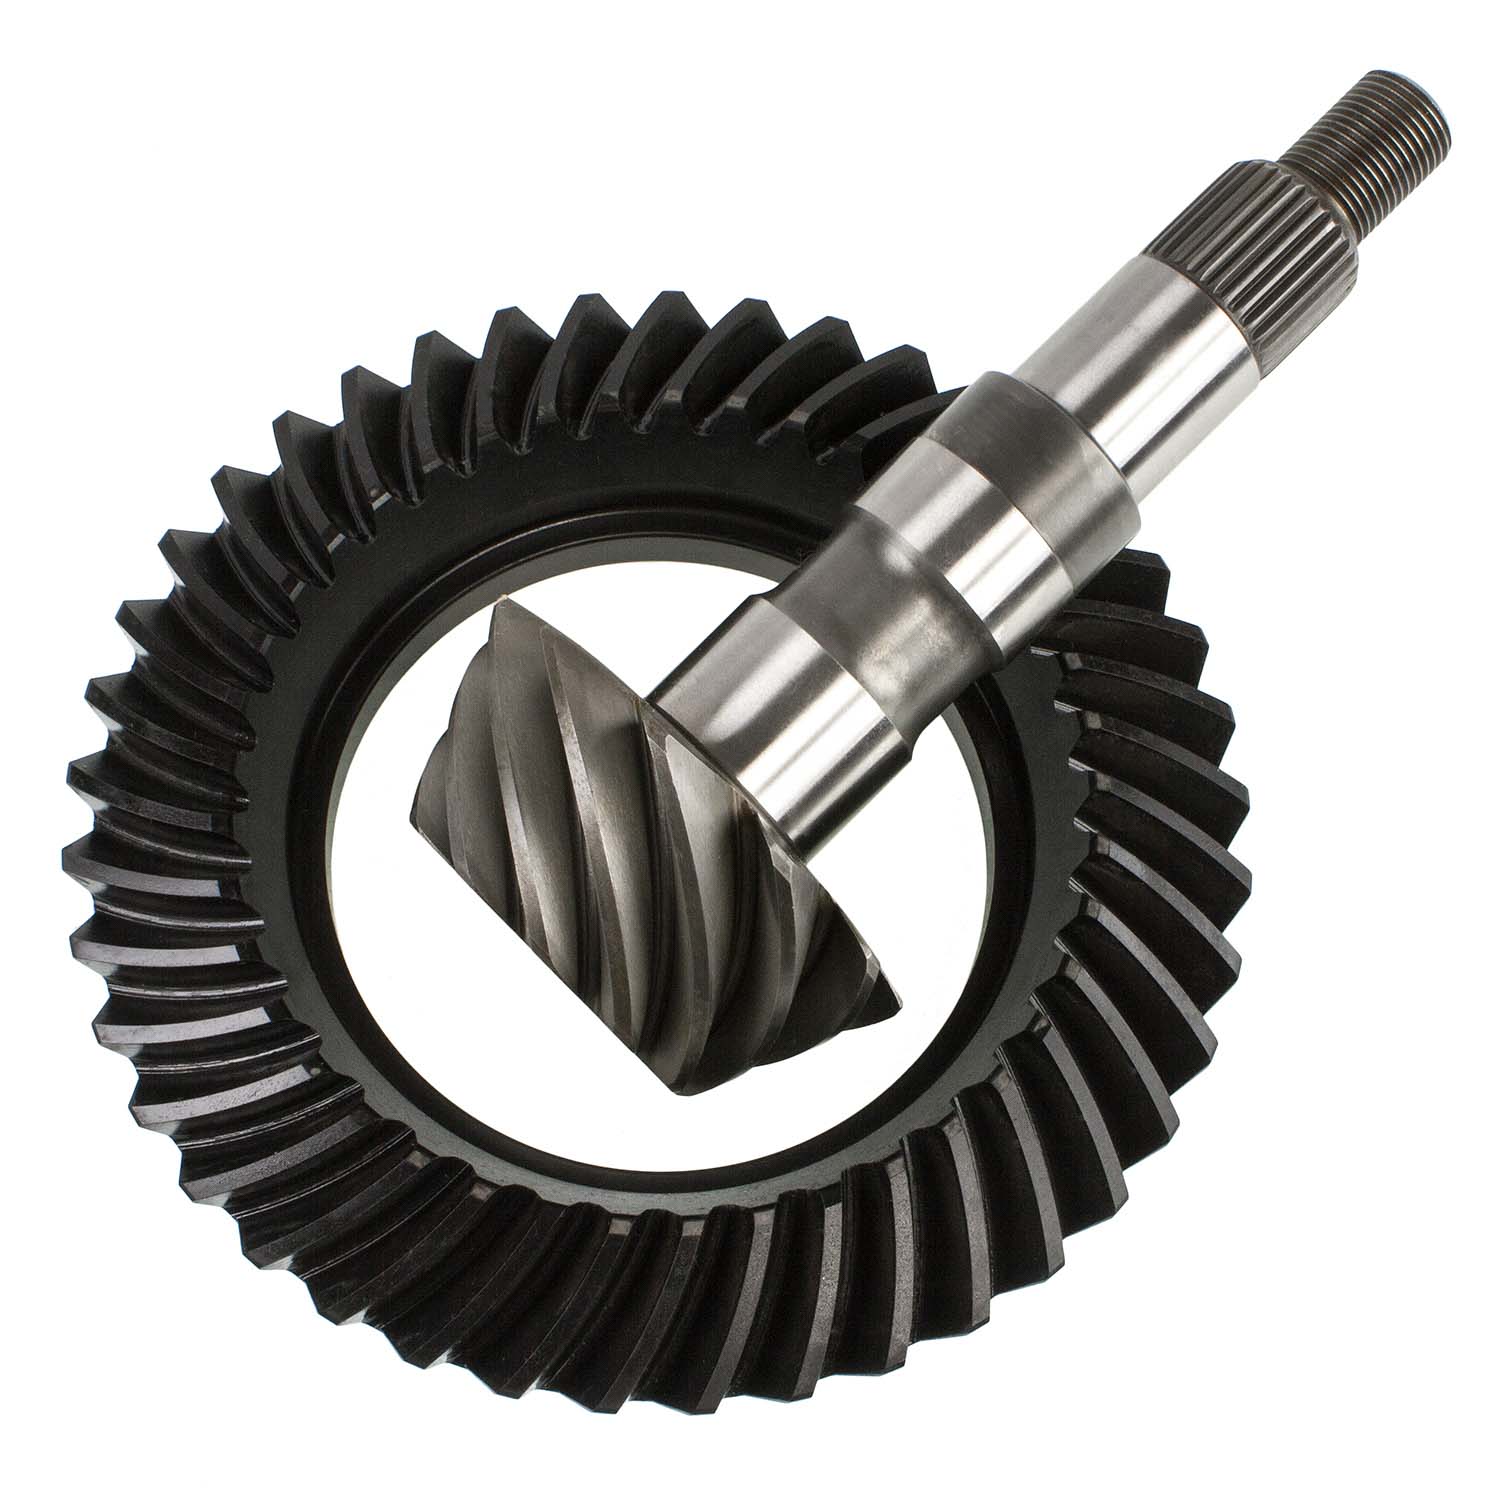 Dorman 697-810 Differential Ring And Pinion Set 